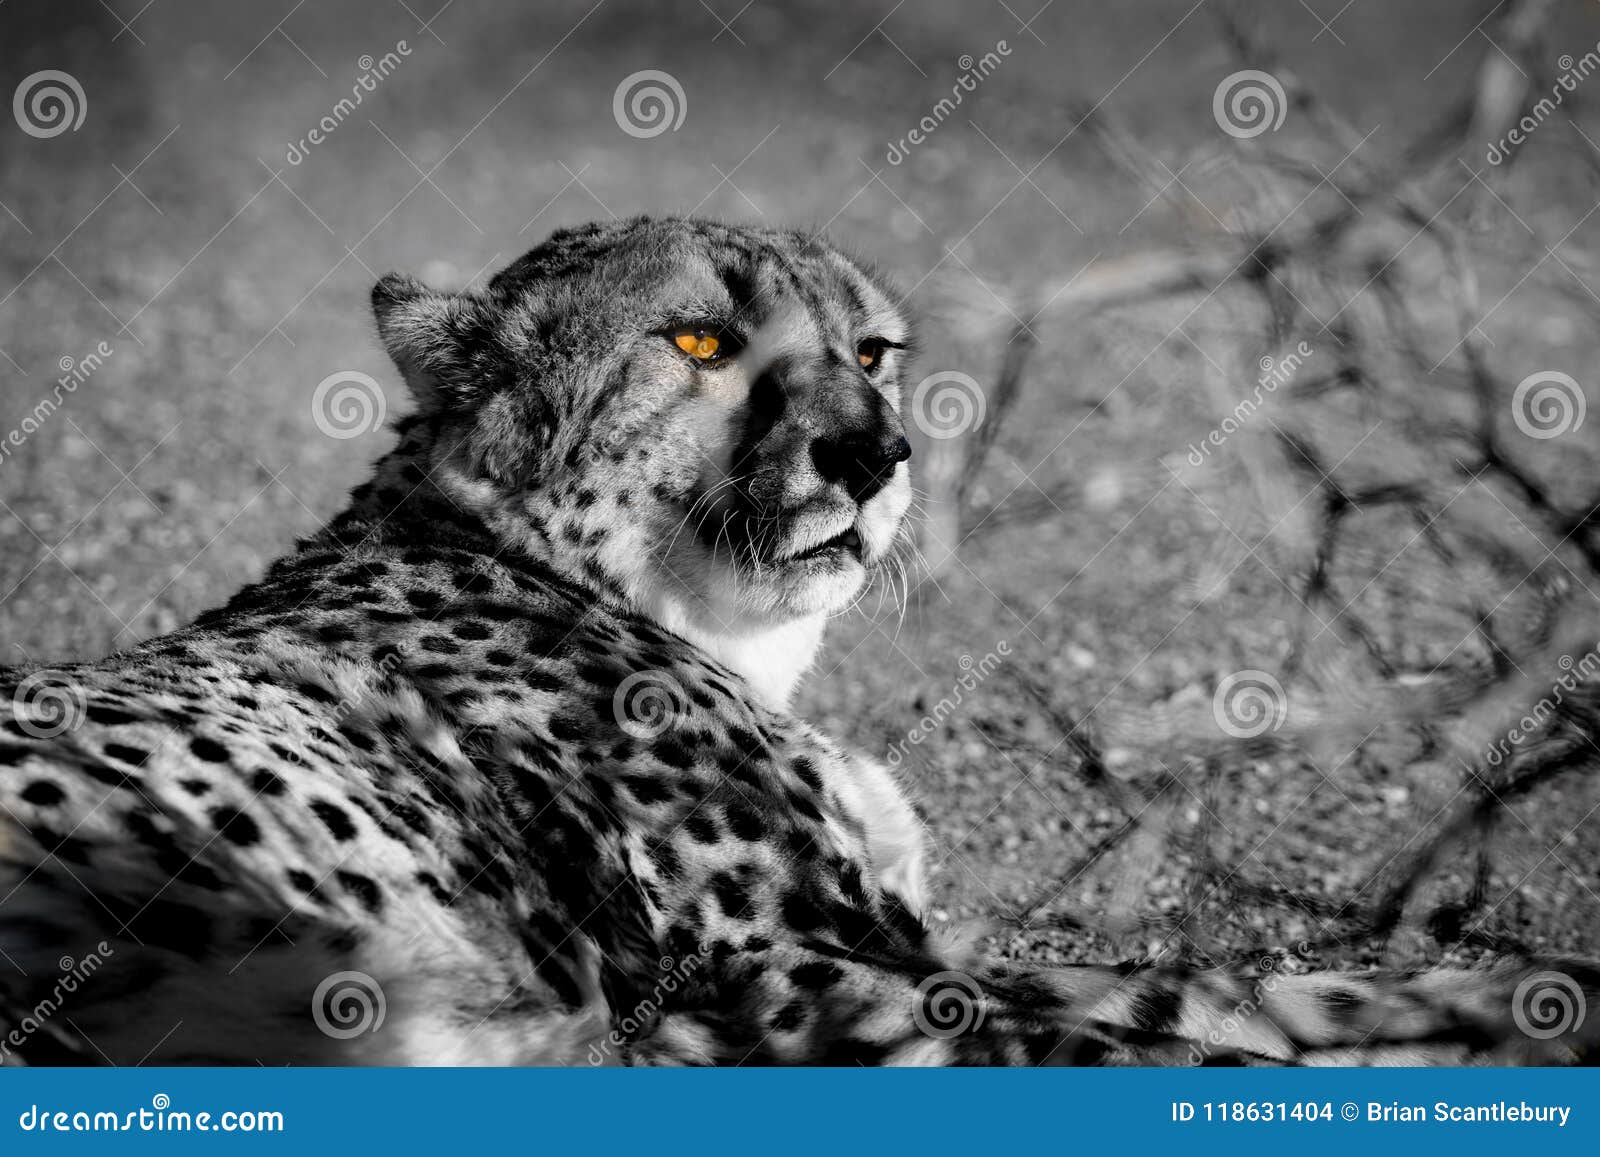 Wild cheetah in Namibia. stock photo. Image of landscape - 118631404